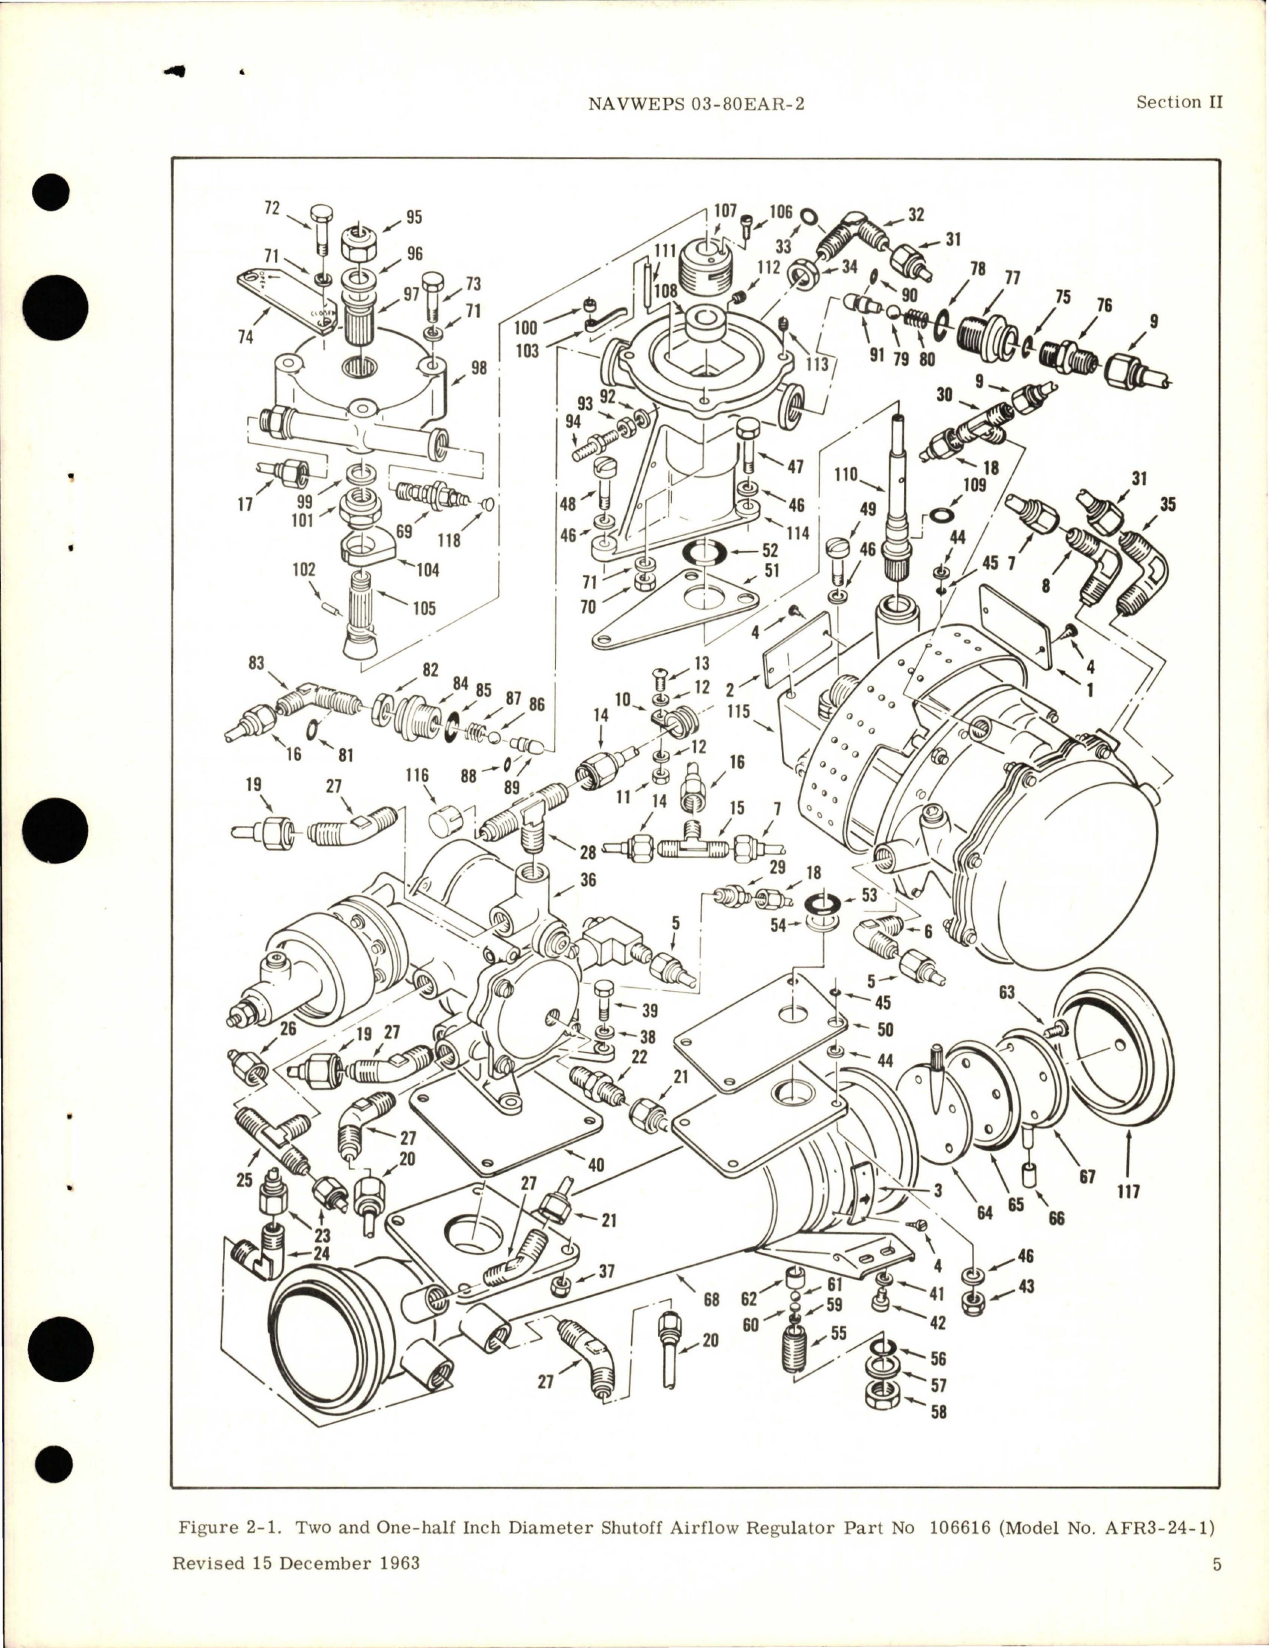 Sample page 5 from AirCorps Library document: Overhaul Instructions for Two and One-Half Inch Diameter Shutoff Airflow Regulator - Part 106616, 106616-1-1